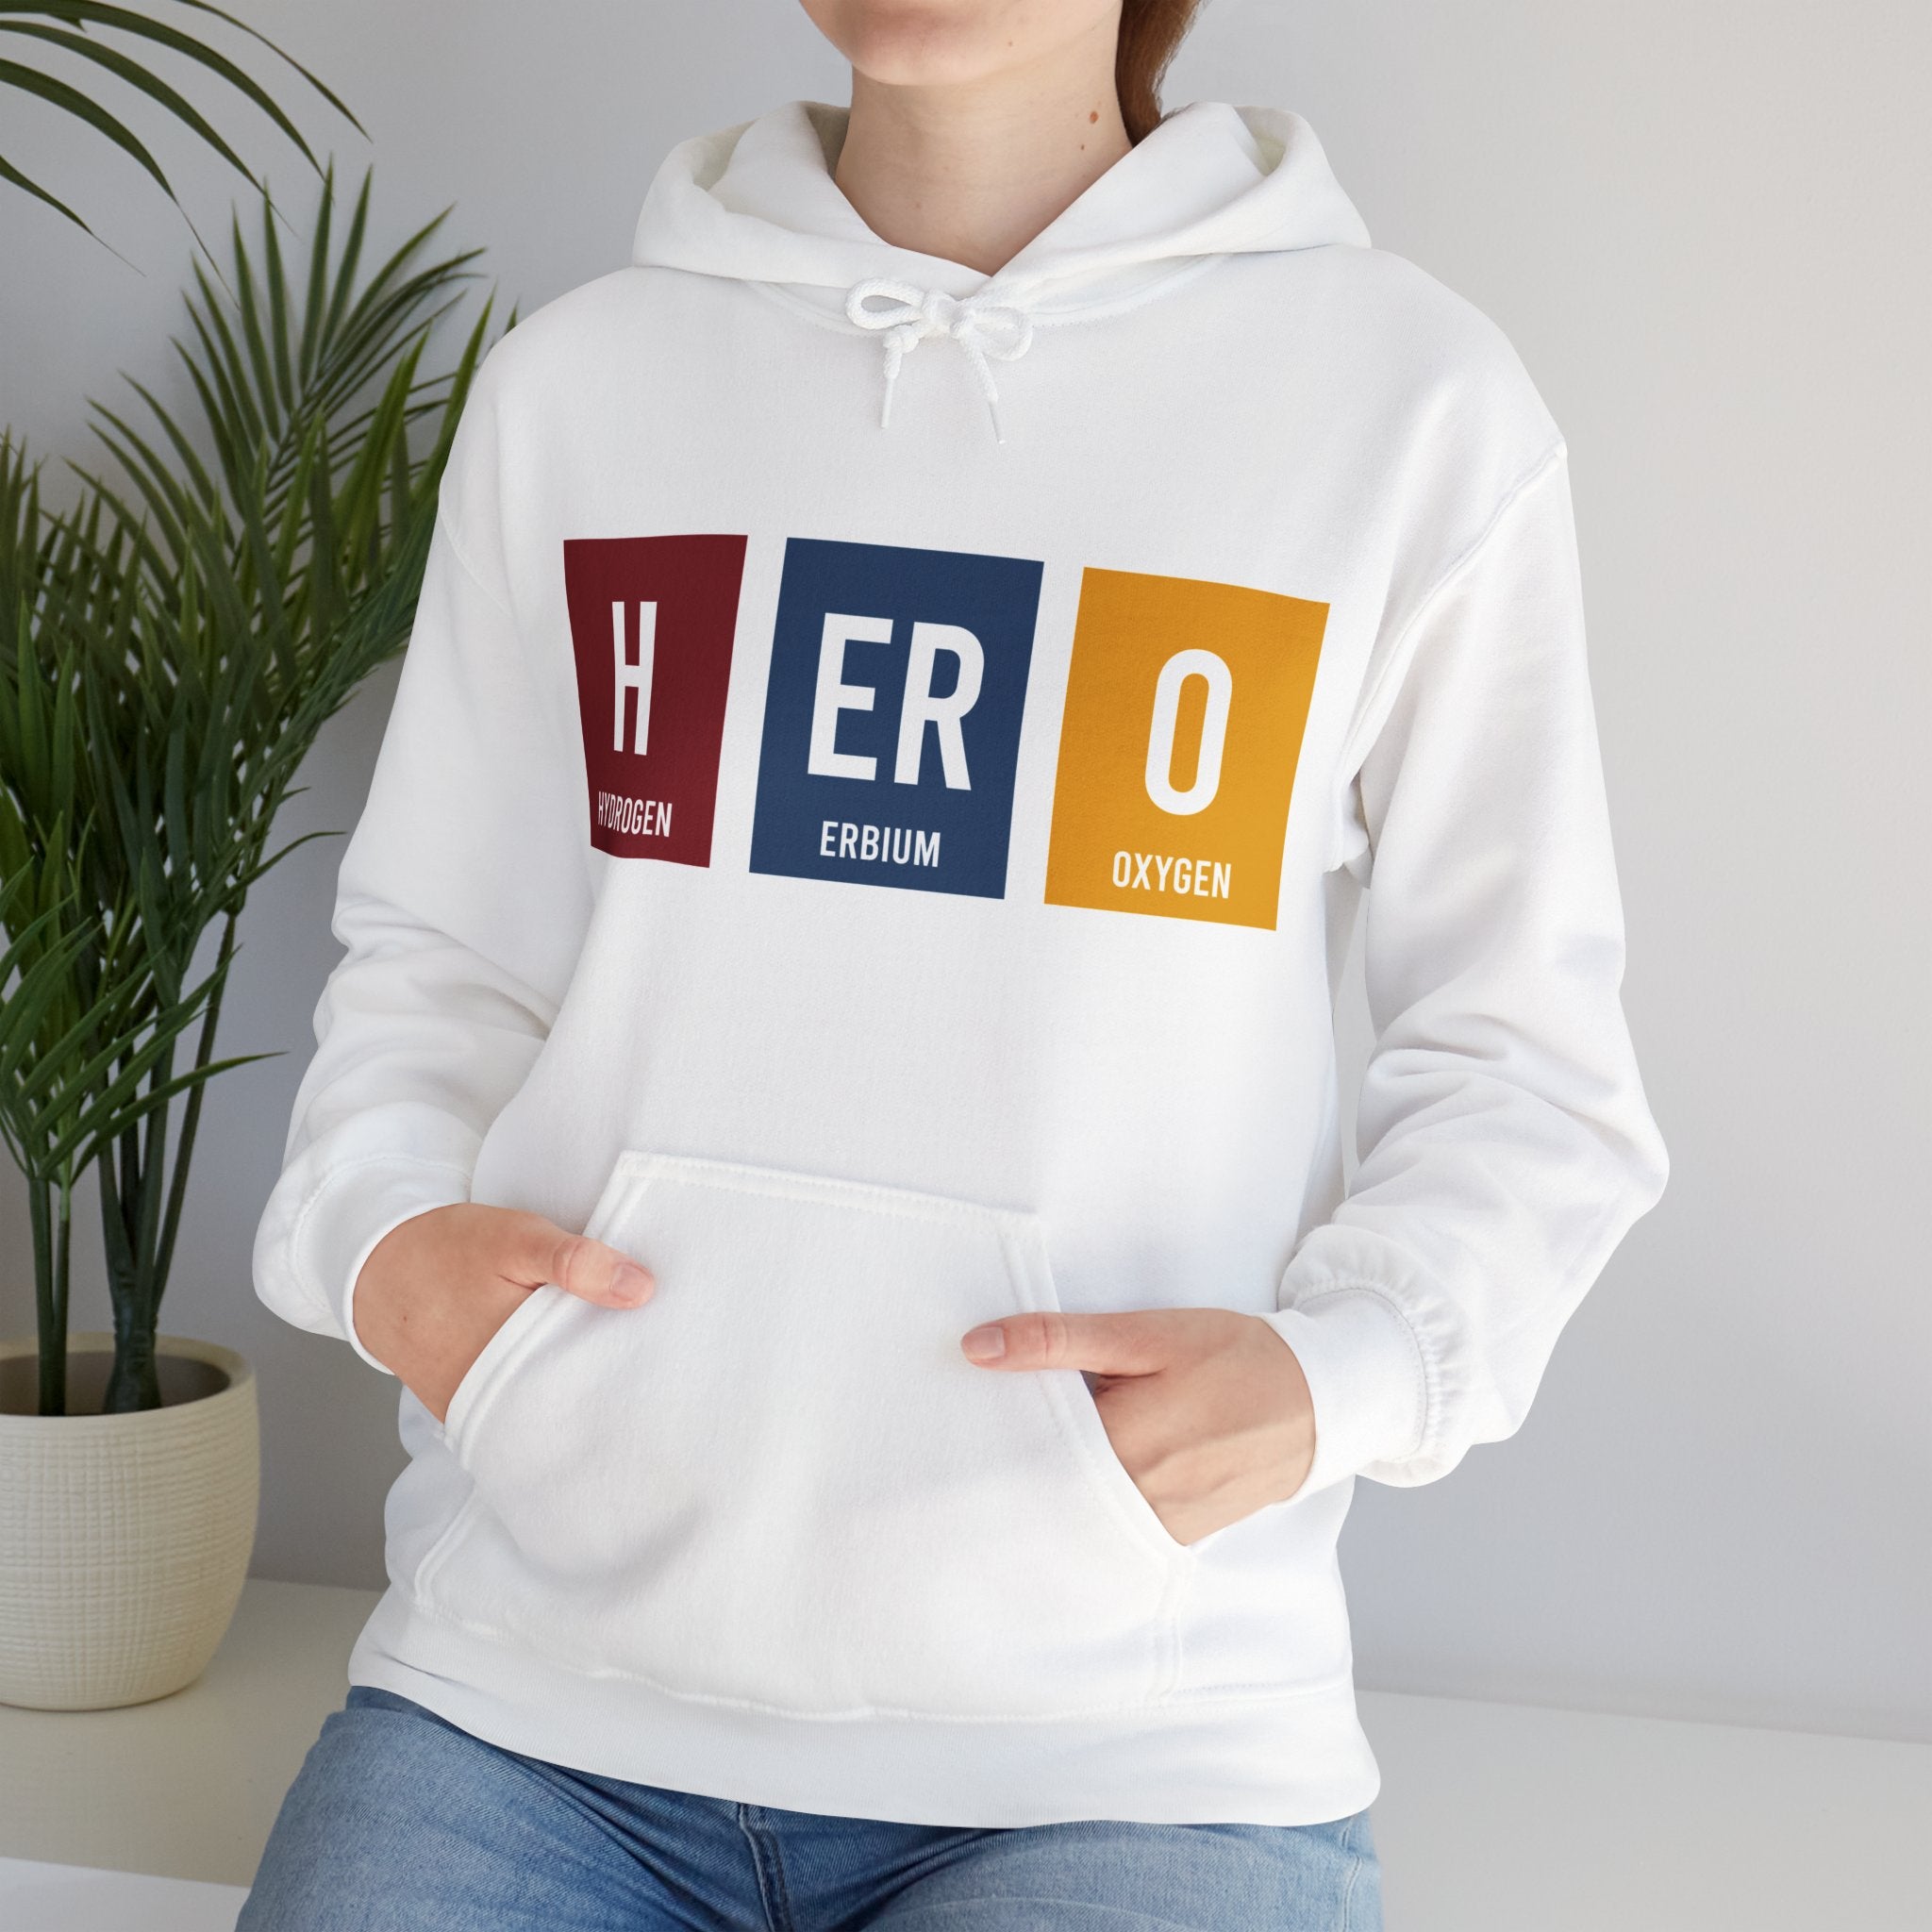 A person wearing a white **HERO - Hooded Sweatshirt** with the word "HERO" cleverly designed using the symbols for hydrogen, erbium, and oxygen from the periodic table. They are standing with hands in the hoodie’s front pocket, embodying an element of heroism in their stance.